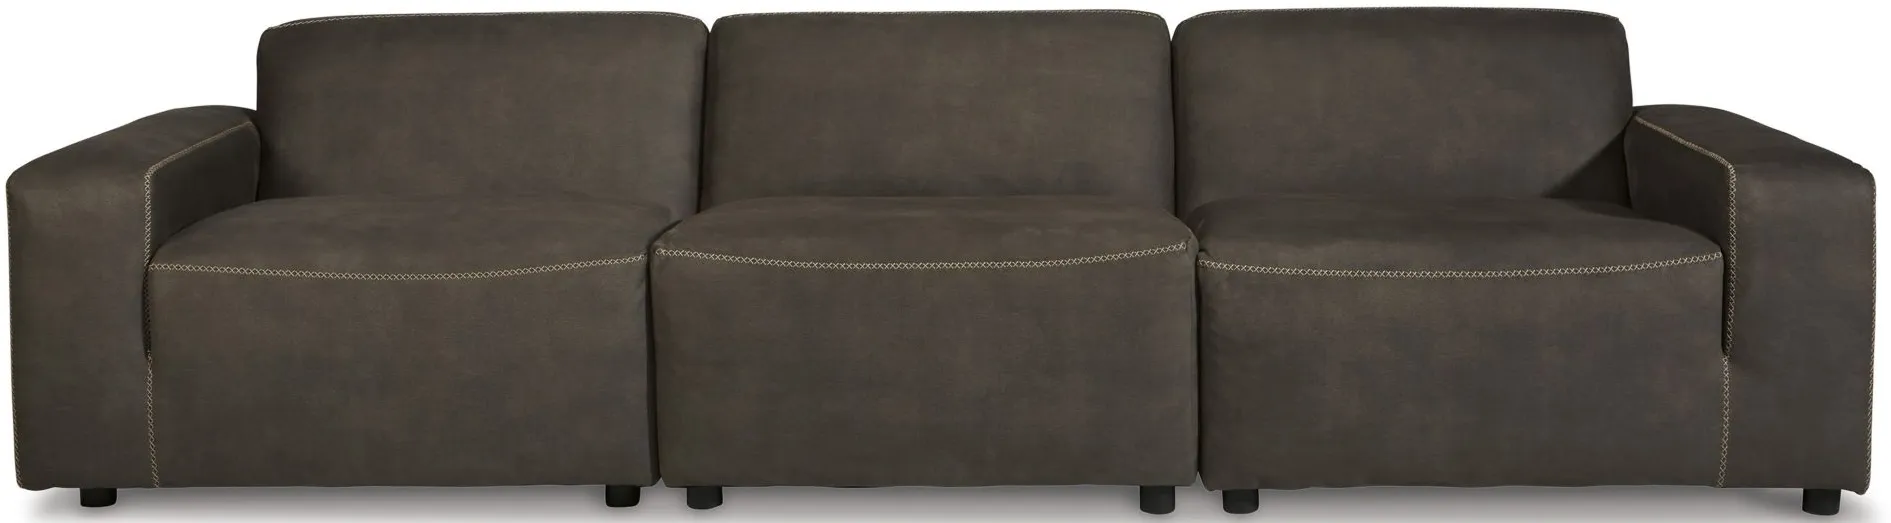 Allena 3-pc. Sectional Sofa in Gunmetal by Ashley Furniture